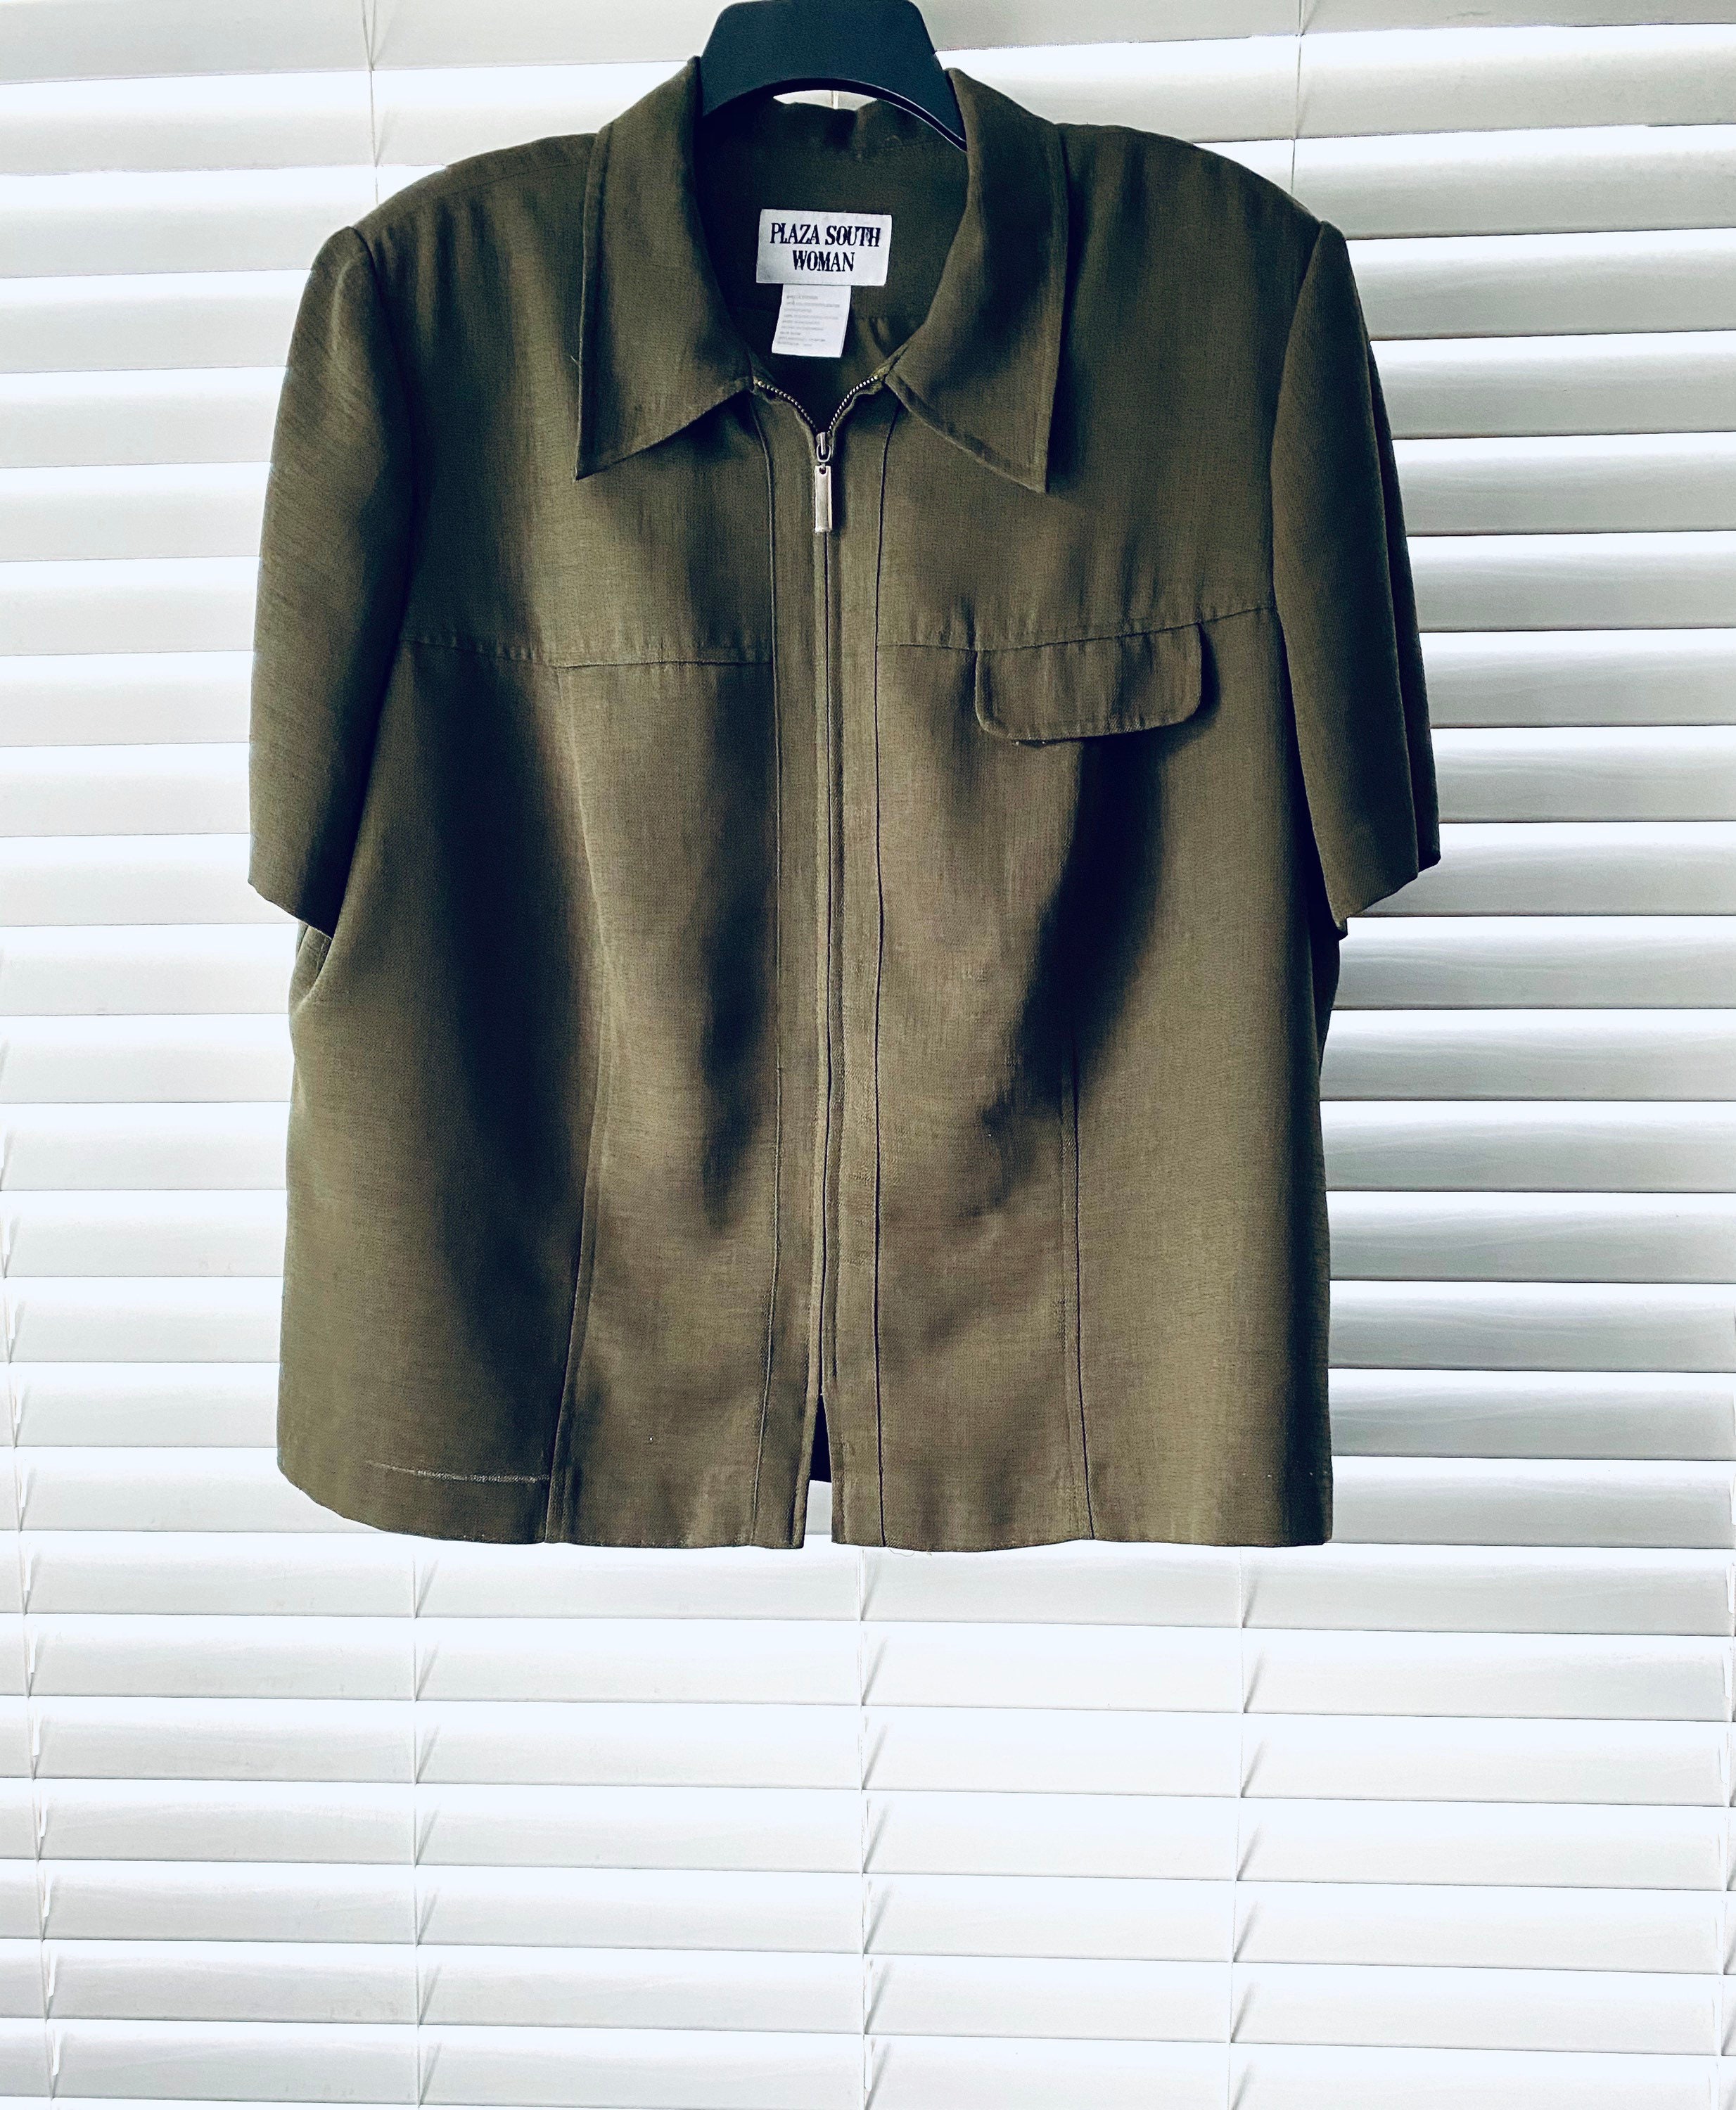 90s Plaza South Woman Olive Green Bomber Jacket 90s Vintage - Etsy